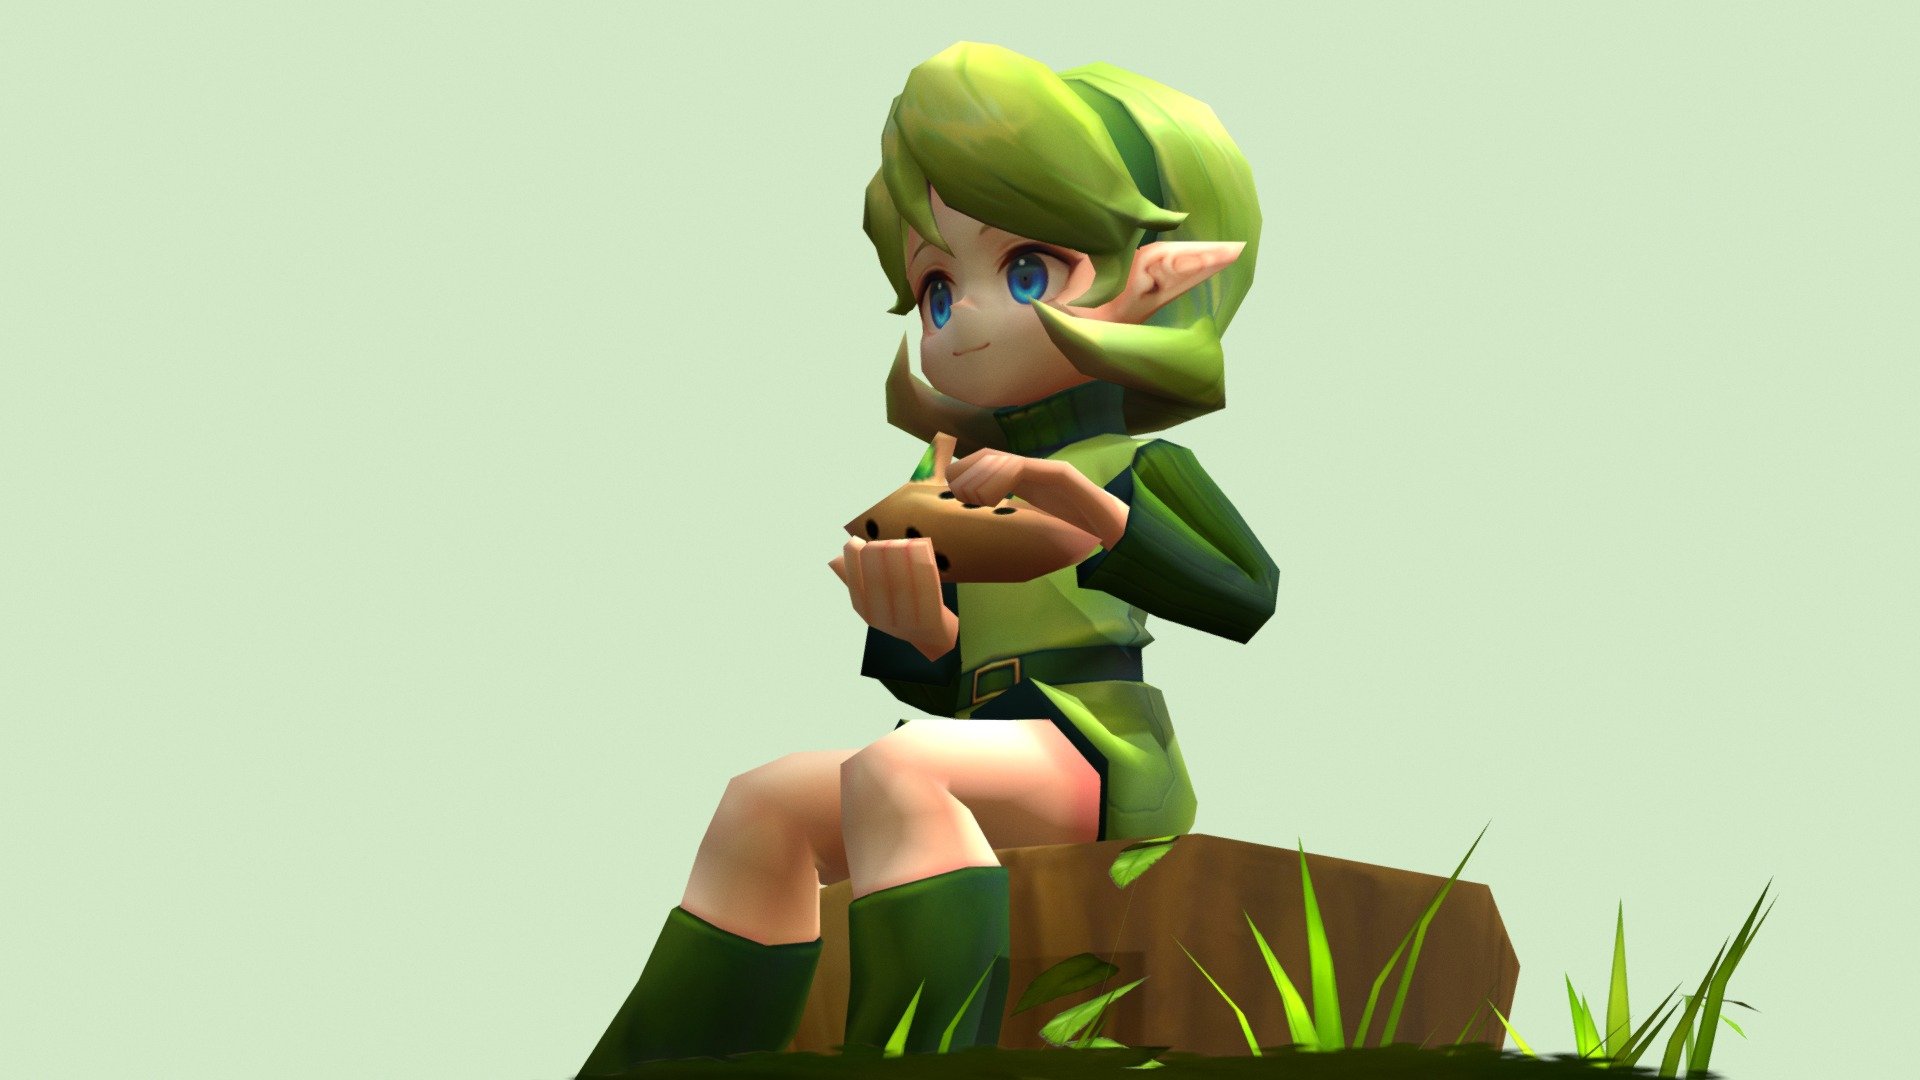 saria-from-ocarina-of-time-3d-model-by-ambisched-8225746-sketchfab